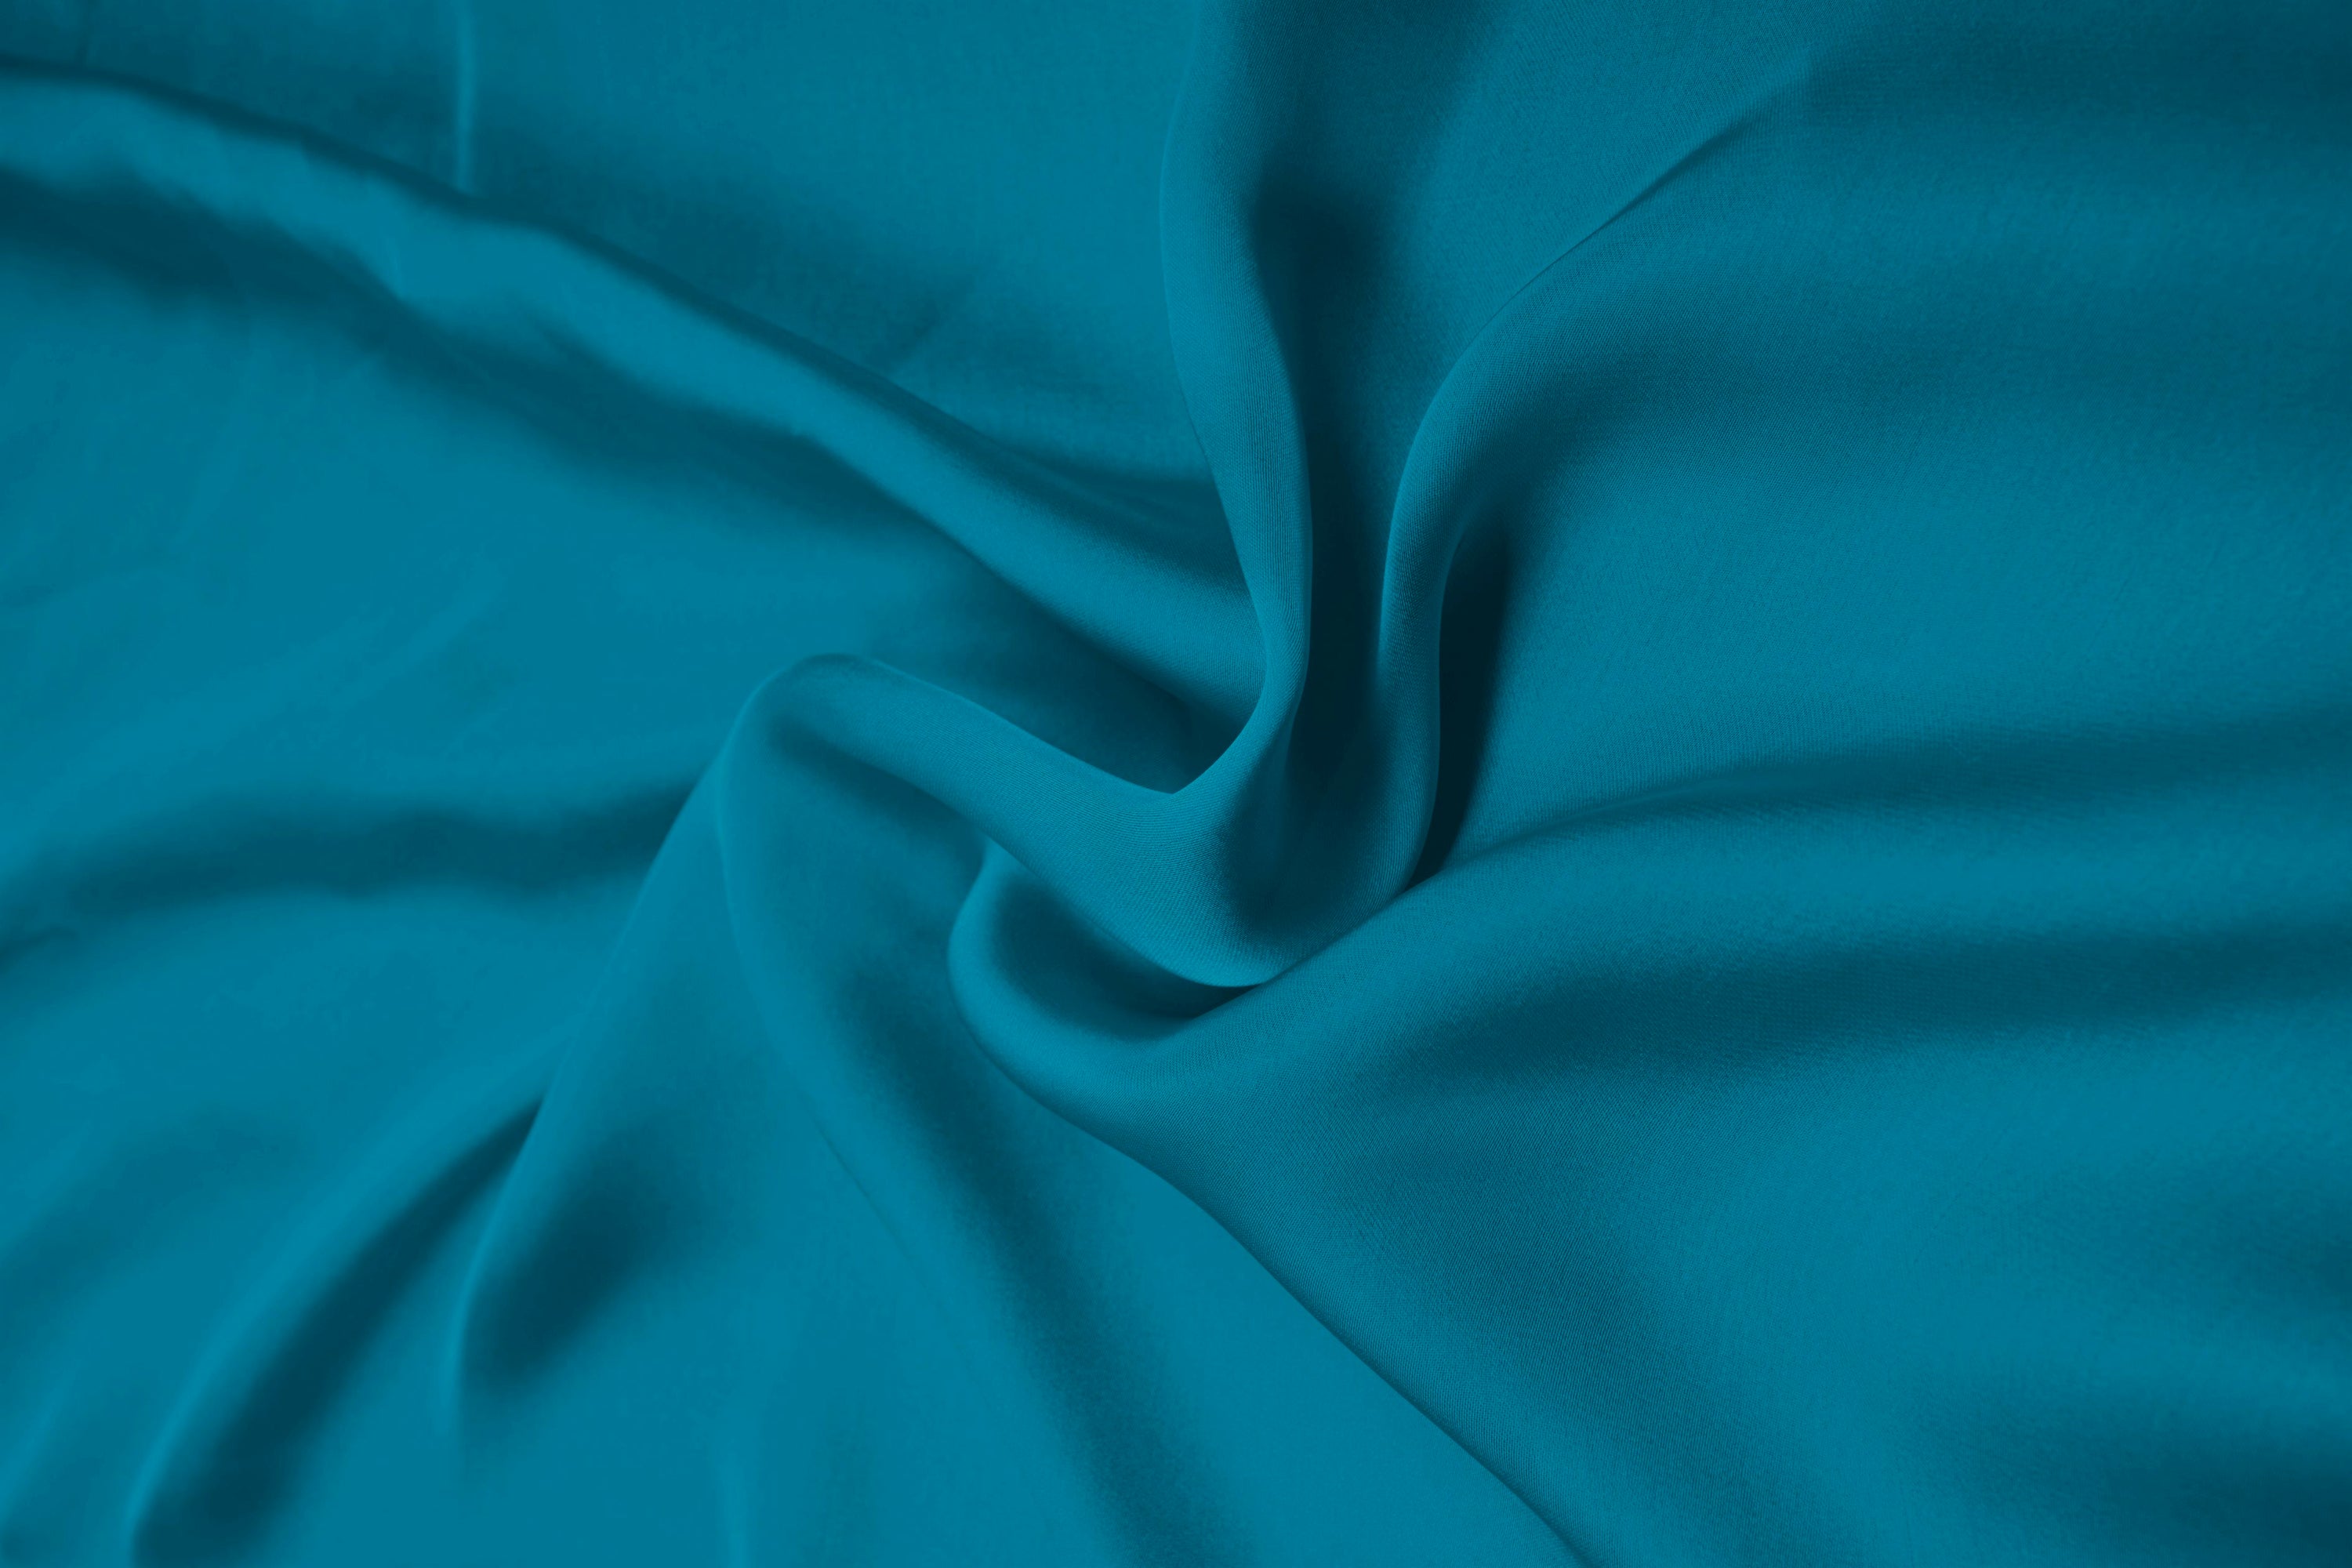 Cationic Teal Plain Dyed Satin Georgette Fabric